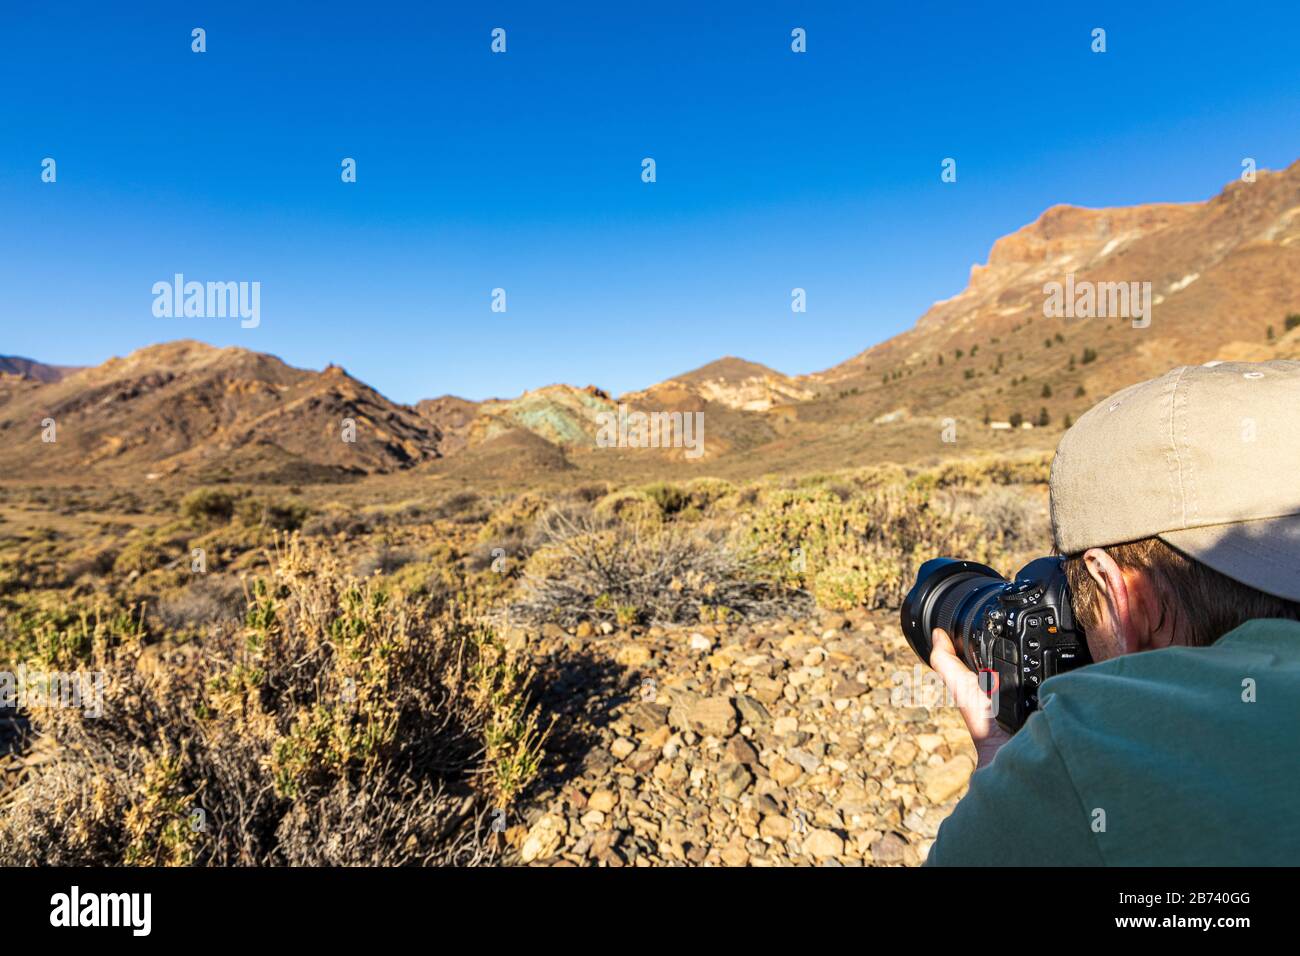 Photographer making a photograph in the volcanic landscape of the National park, Las canadas del Teide, Tenerife, Canary Islands, Spain Stock Photo